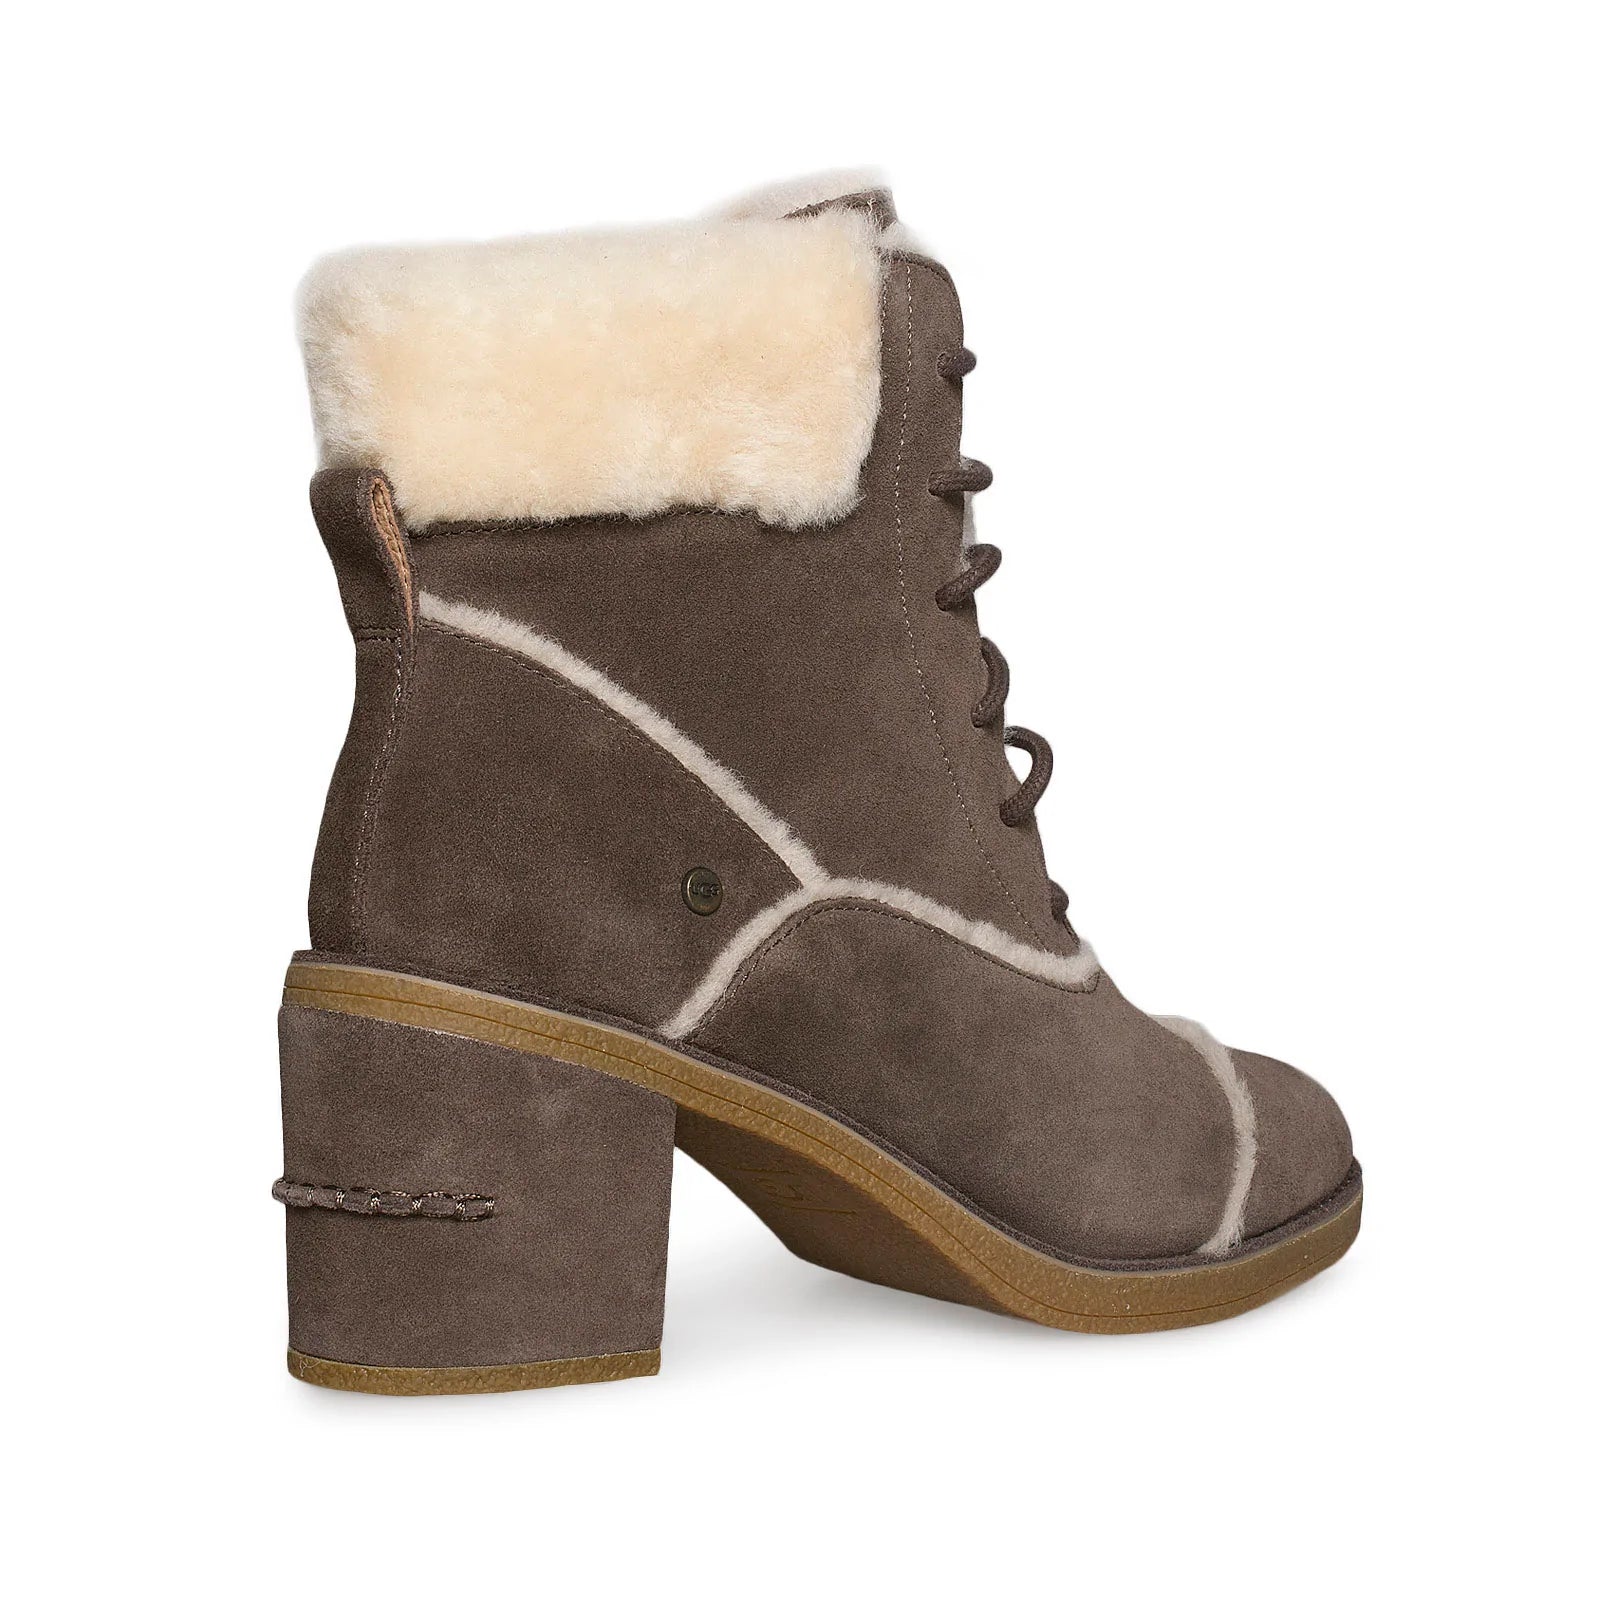 UGG Esterly Mysterious Boots - Women's